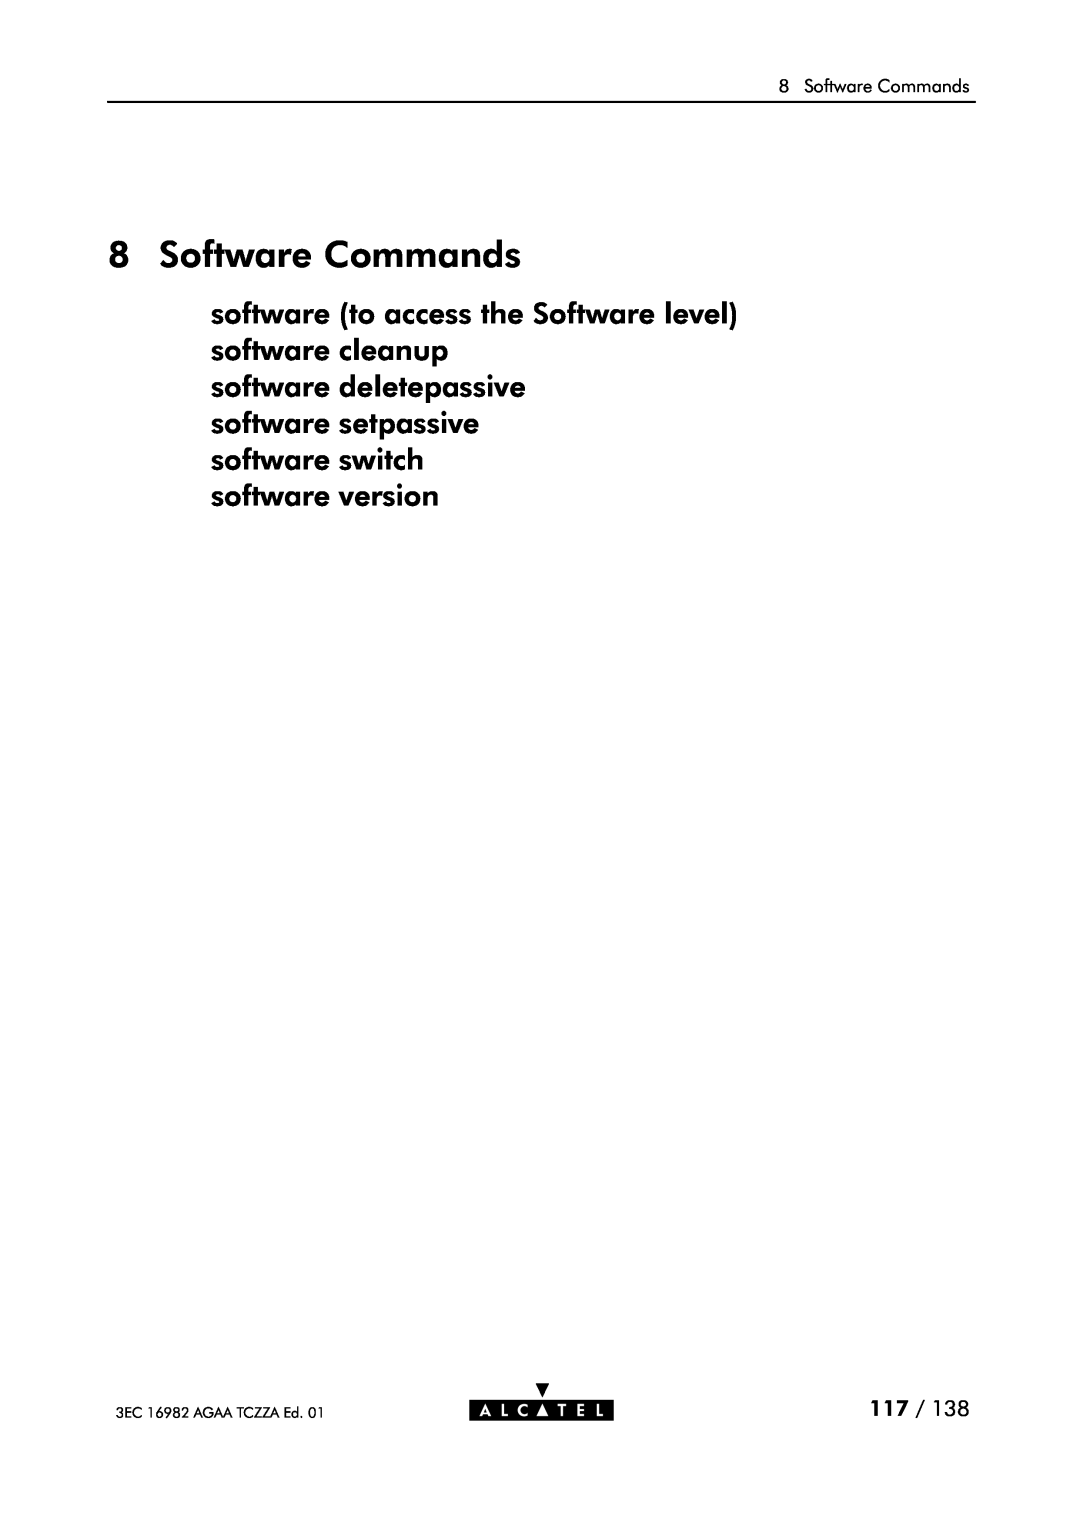 Alcatel Carrier Internetworking Solutions 350I Software Commands, software to access the Software level software cleanup 